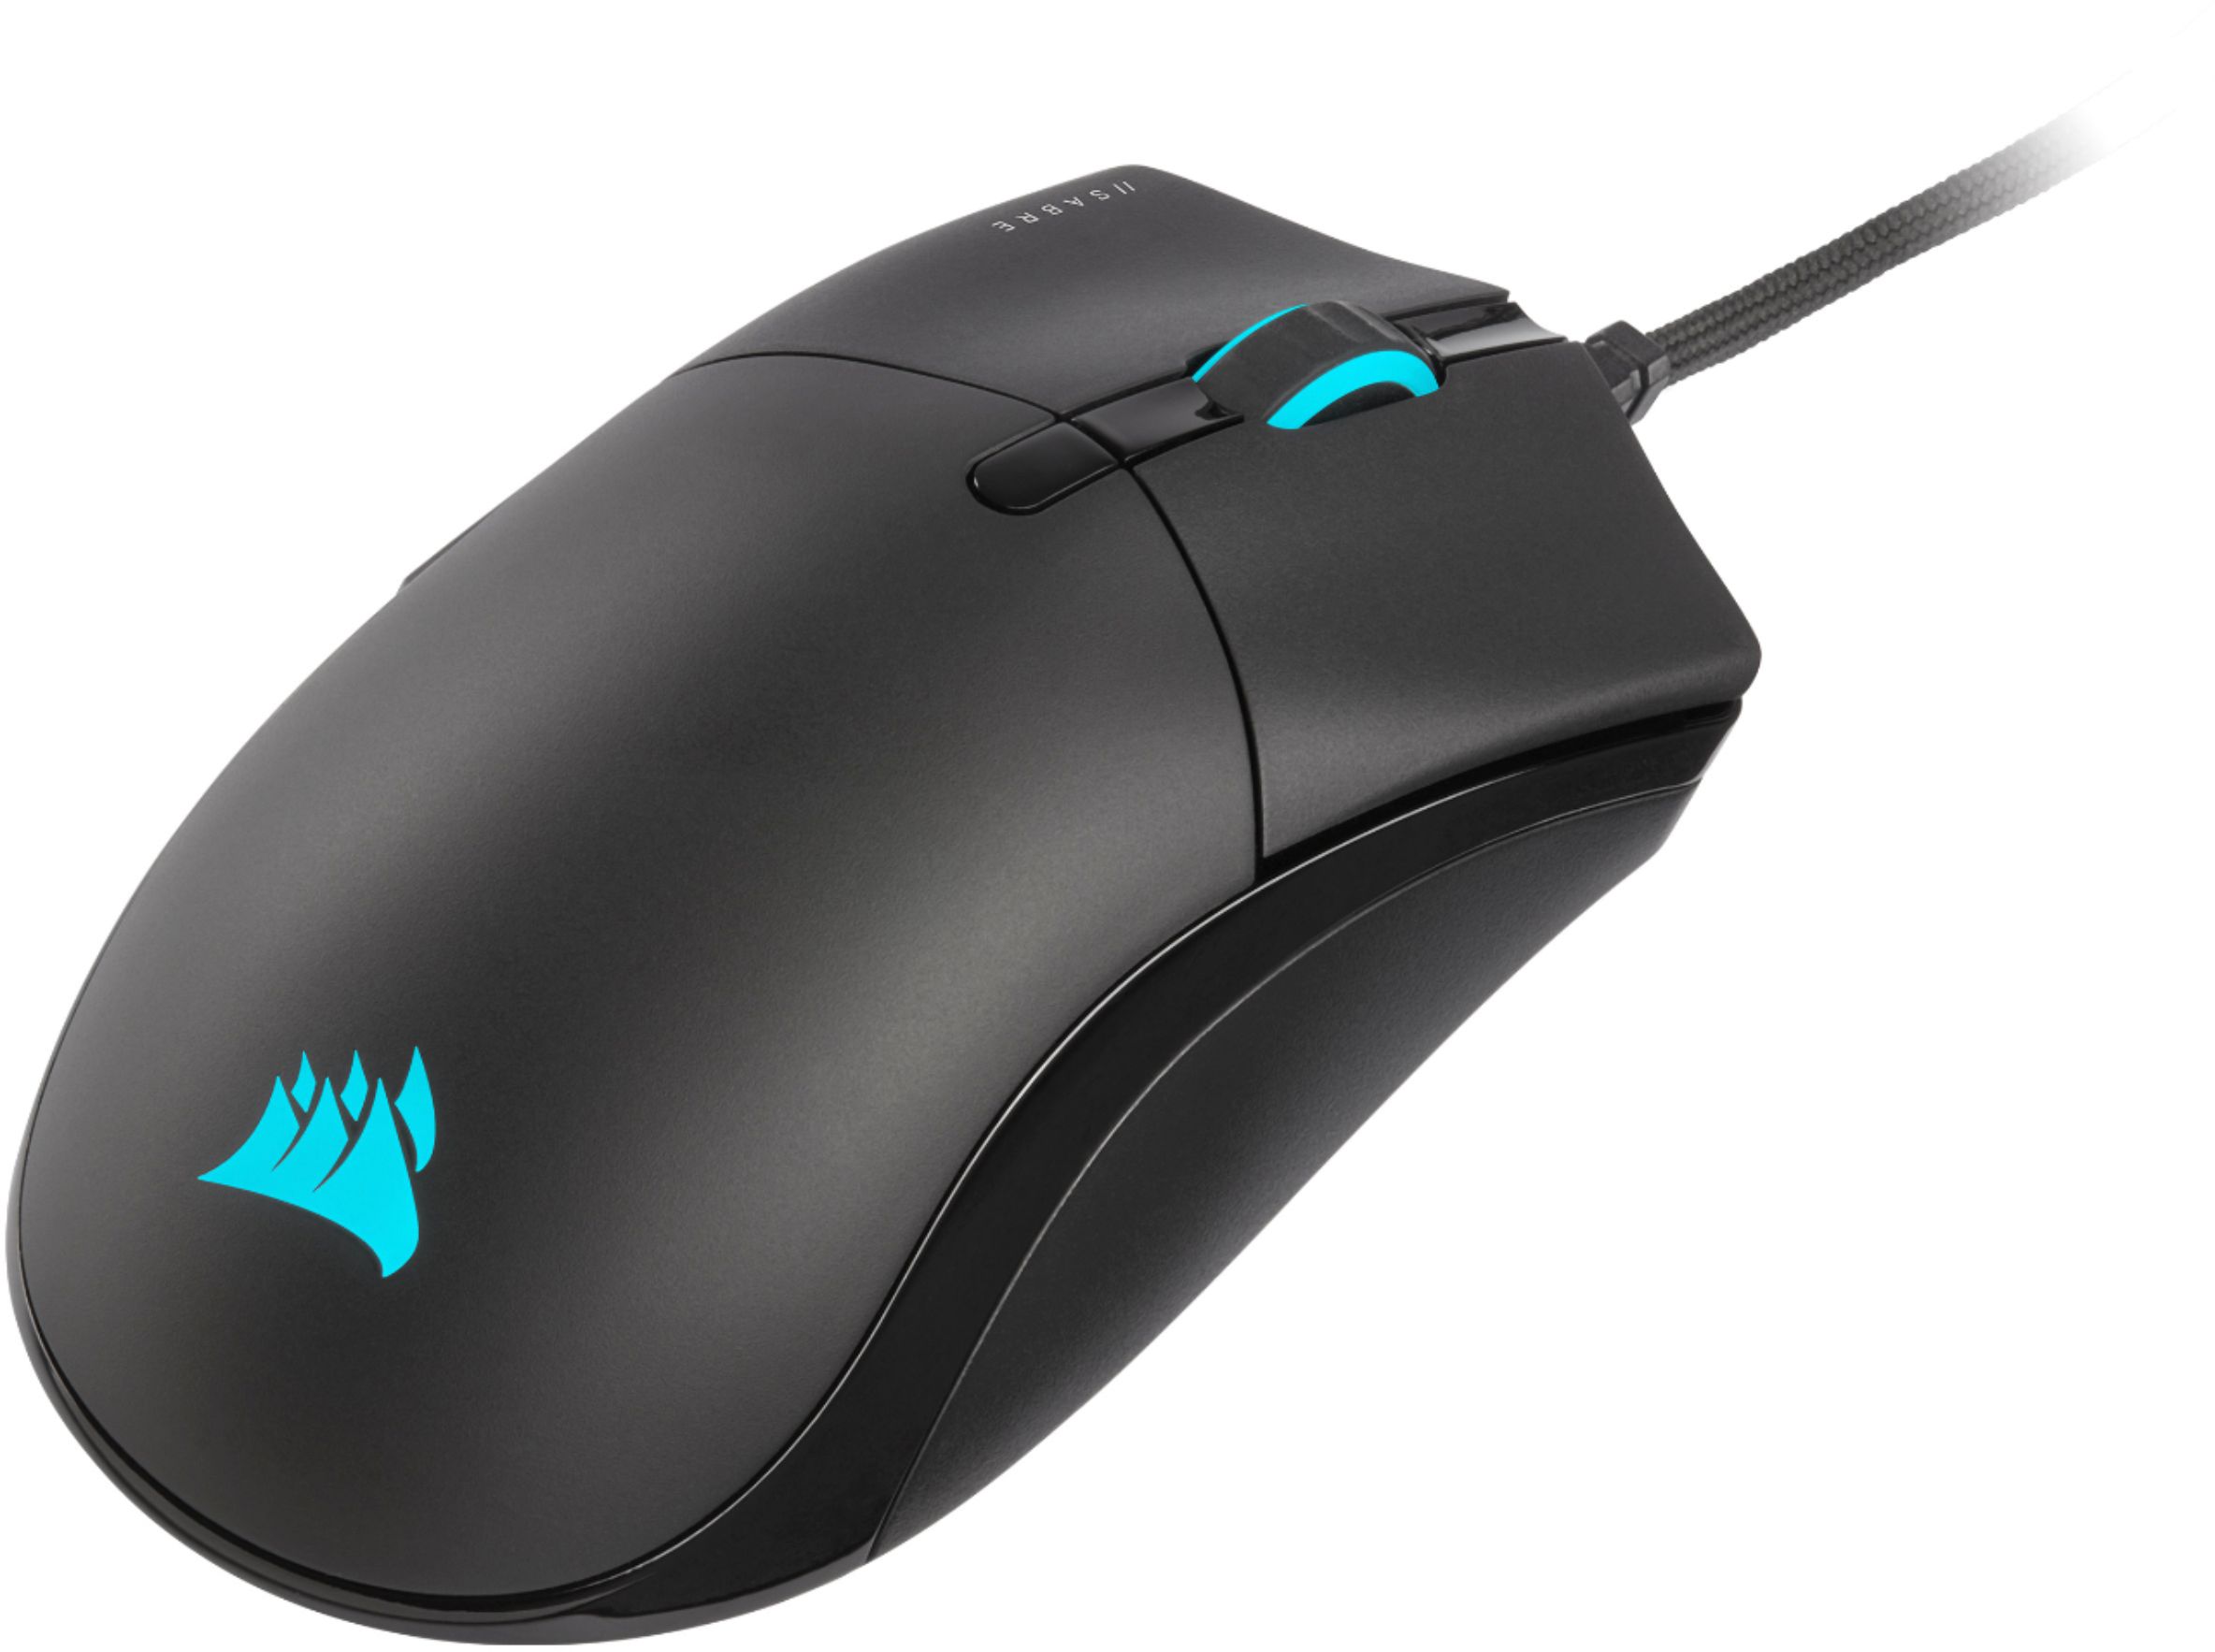 Back View: CORSAIR - CHAMPION SERIES SABRE RGB PRO Lightweight Wired Optical Gaming Mouse with 69g Ultra-lightweight design - Black